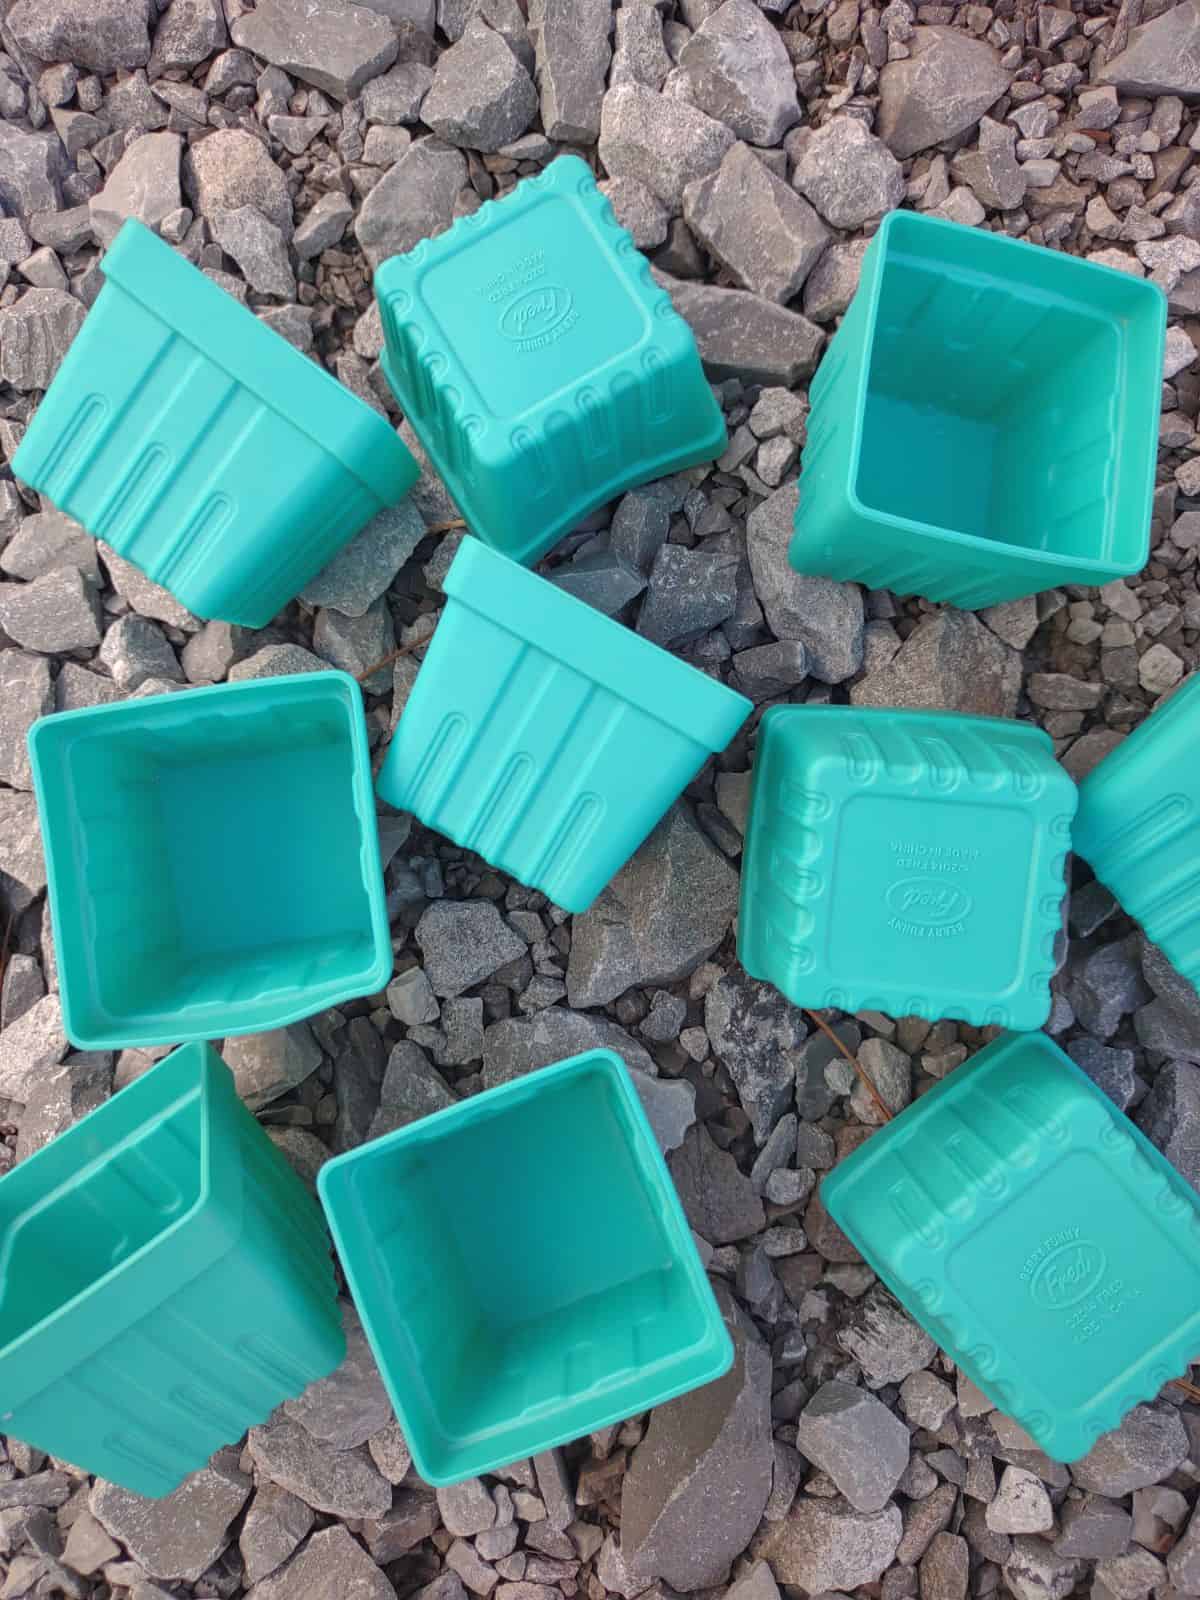 Blue-green mini square silicone baking cups that look like berry containers sitting on gray rocks.